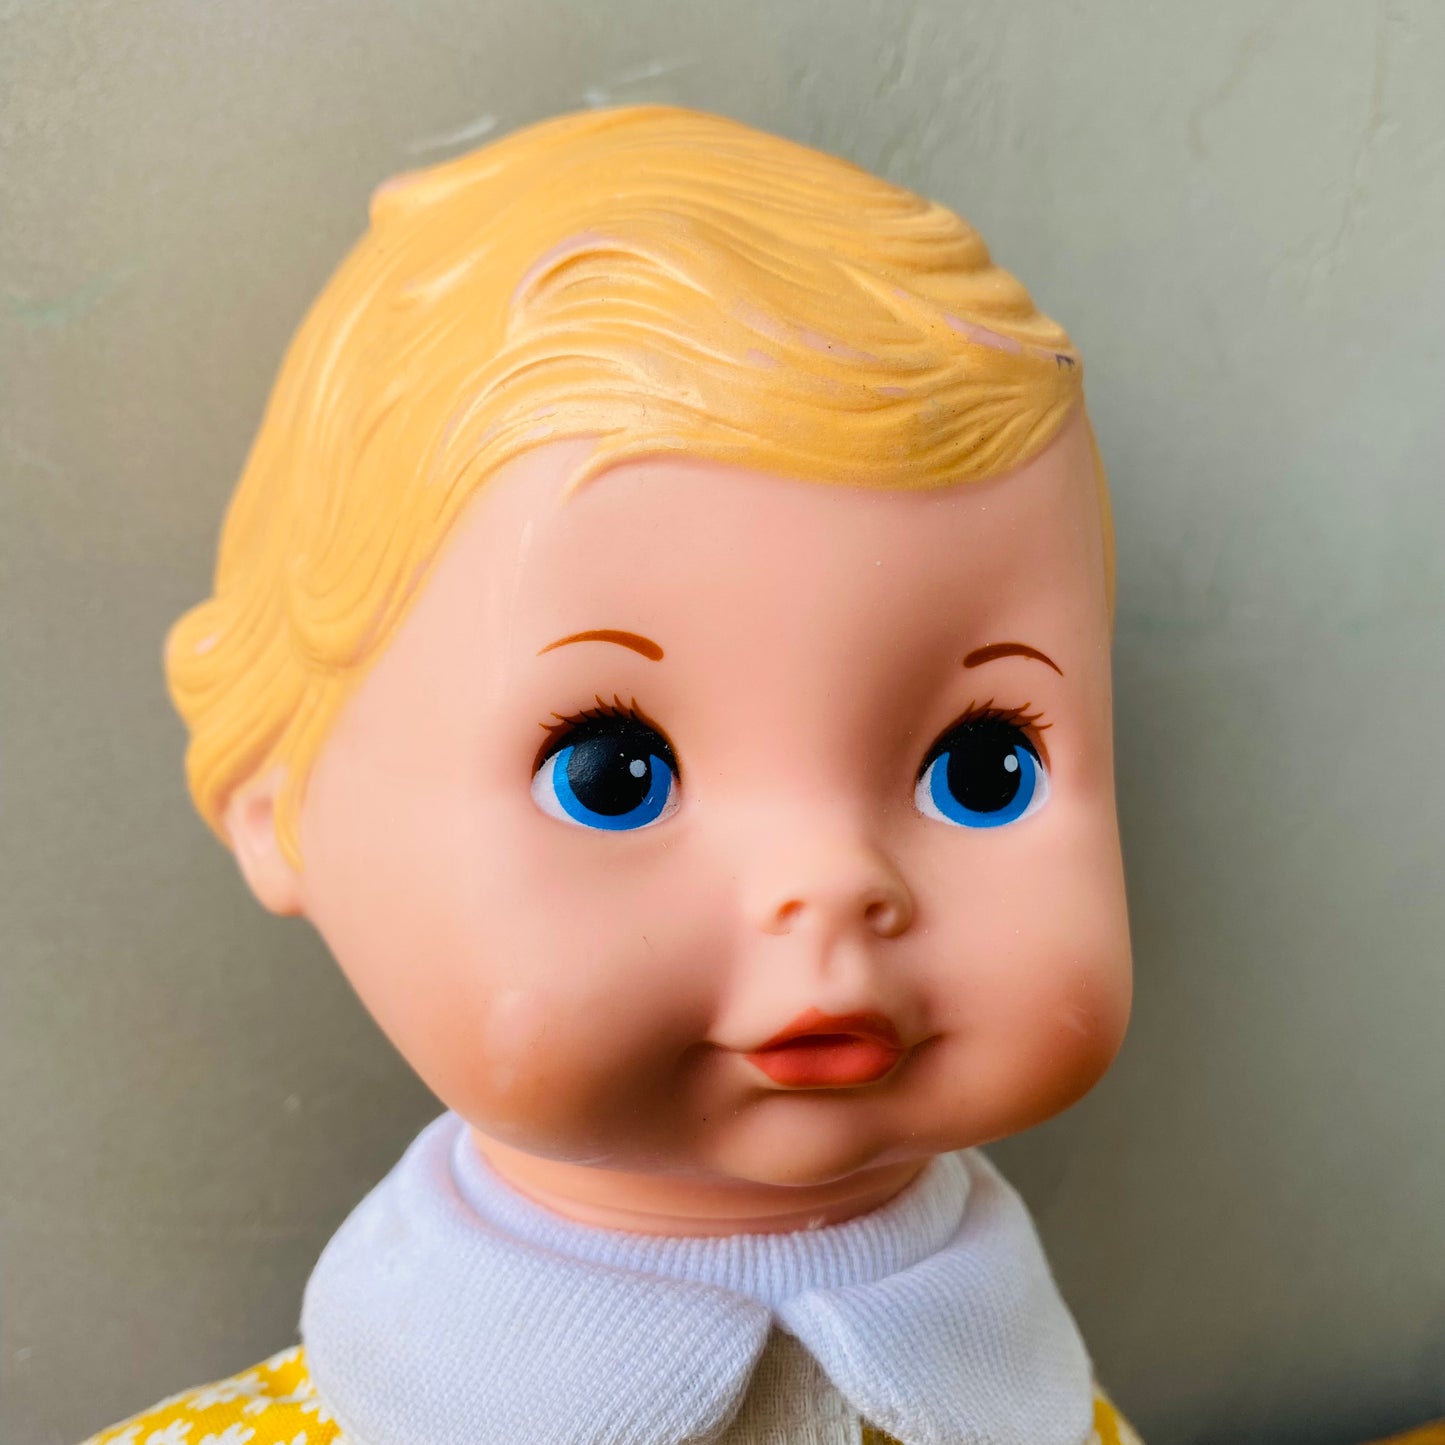 【1975 vintage】 FISHER-PRICE TOYS baby doll